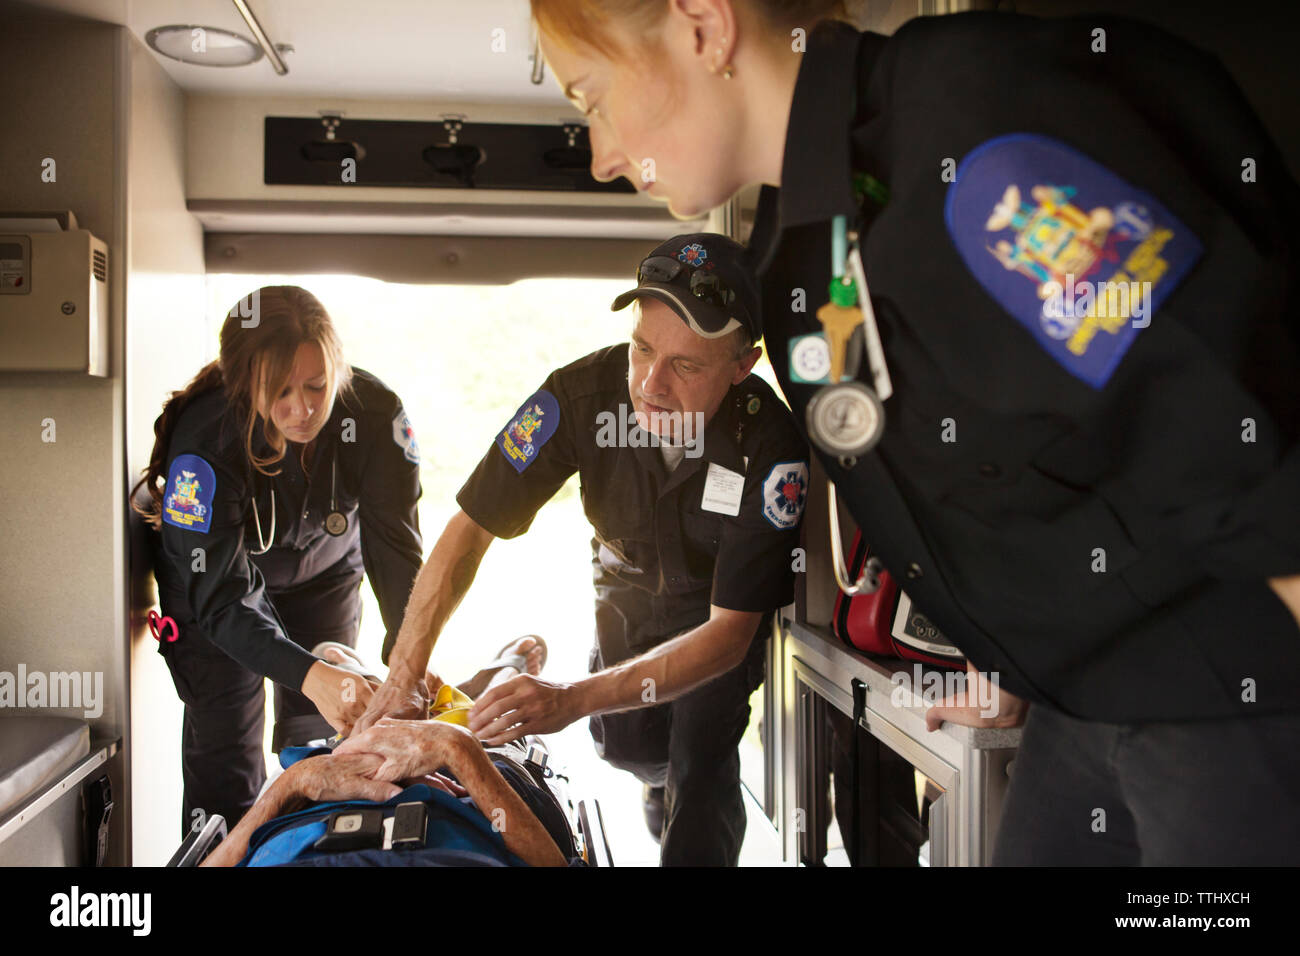 Rescue team providing treatment to patient in ambulance Stock Photo